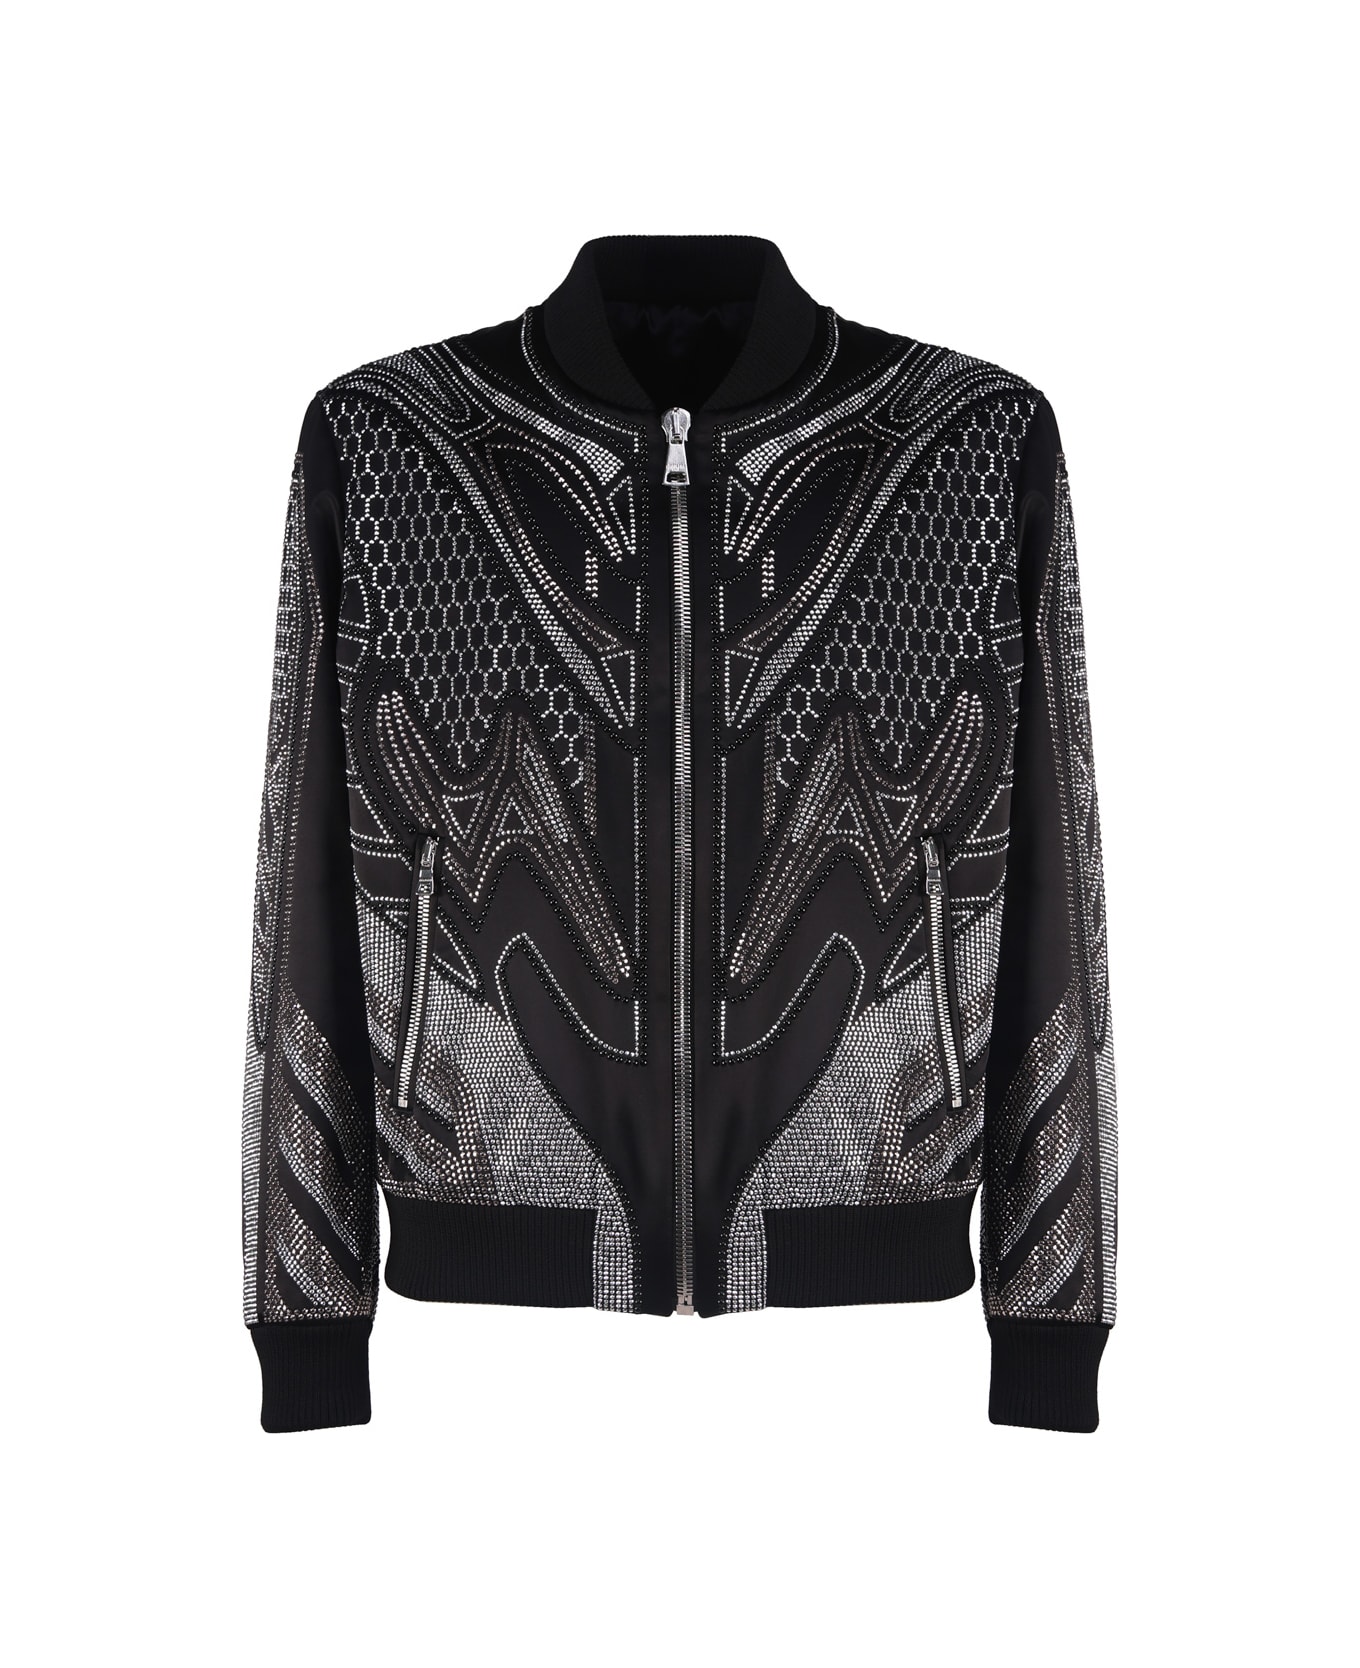 Balmain All-over Embroidered Jacket With Studs - Black ジャケット